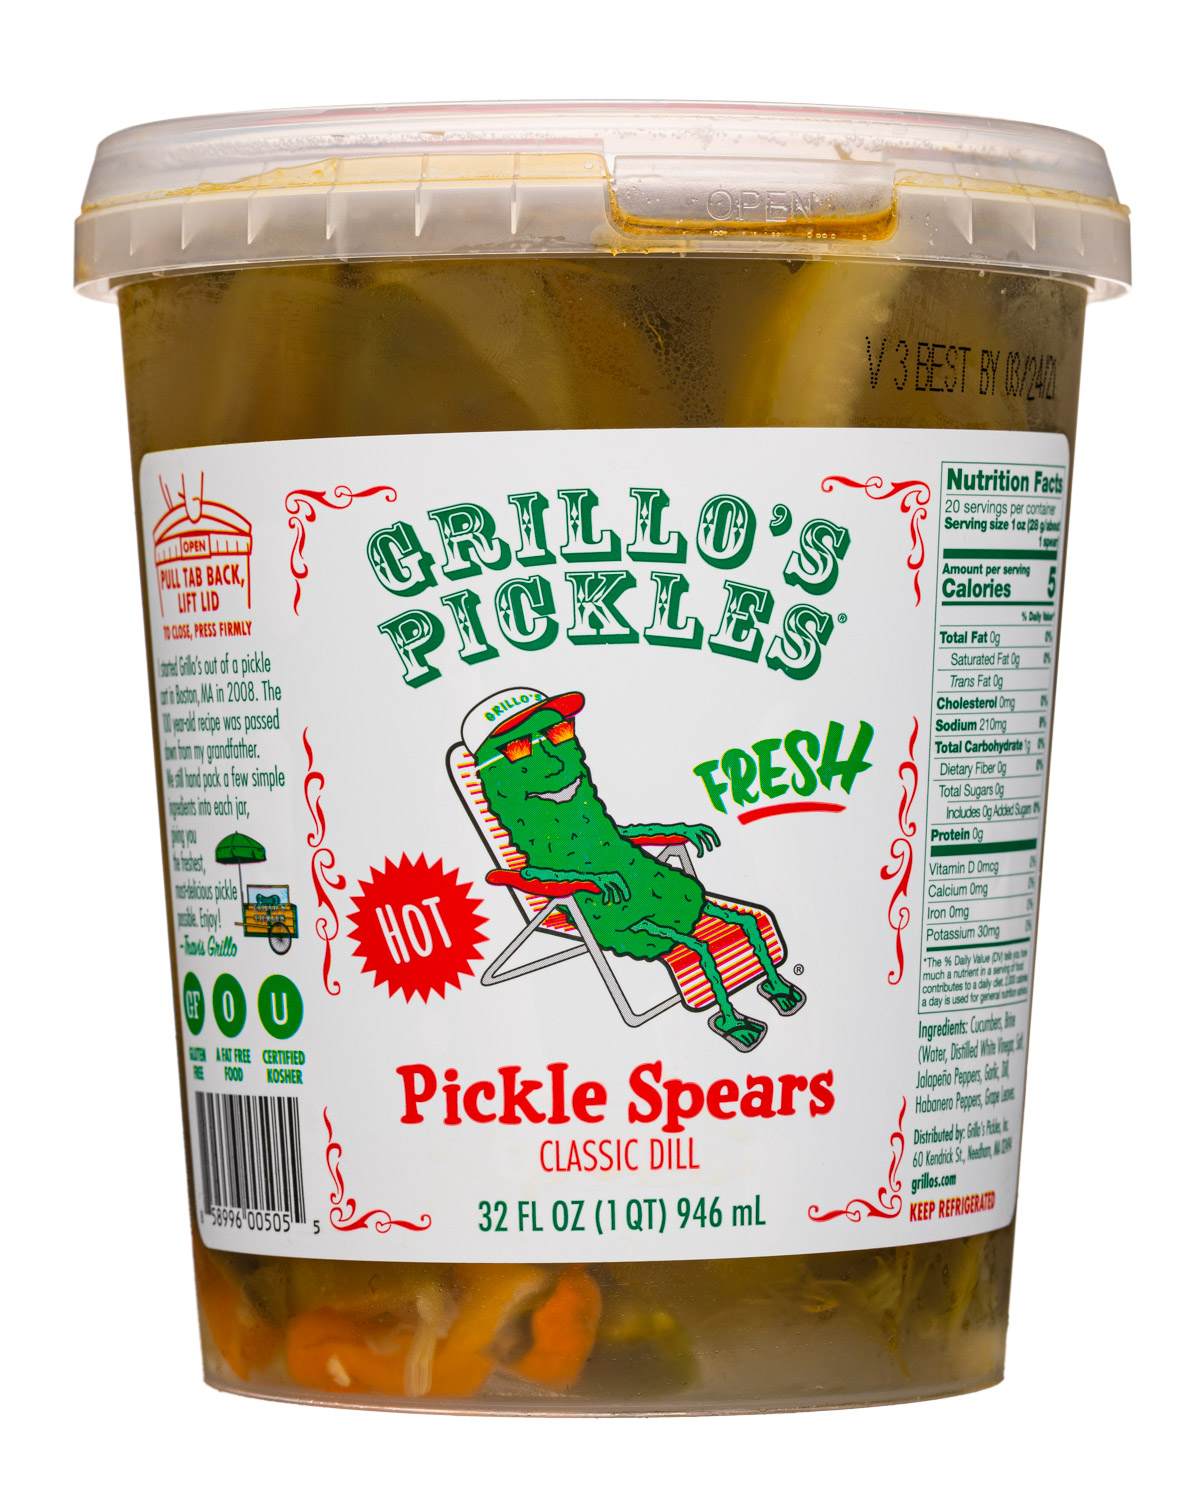 Classic Dill Pickle Spears Hot 32oz